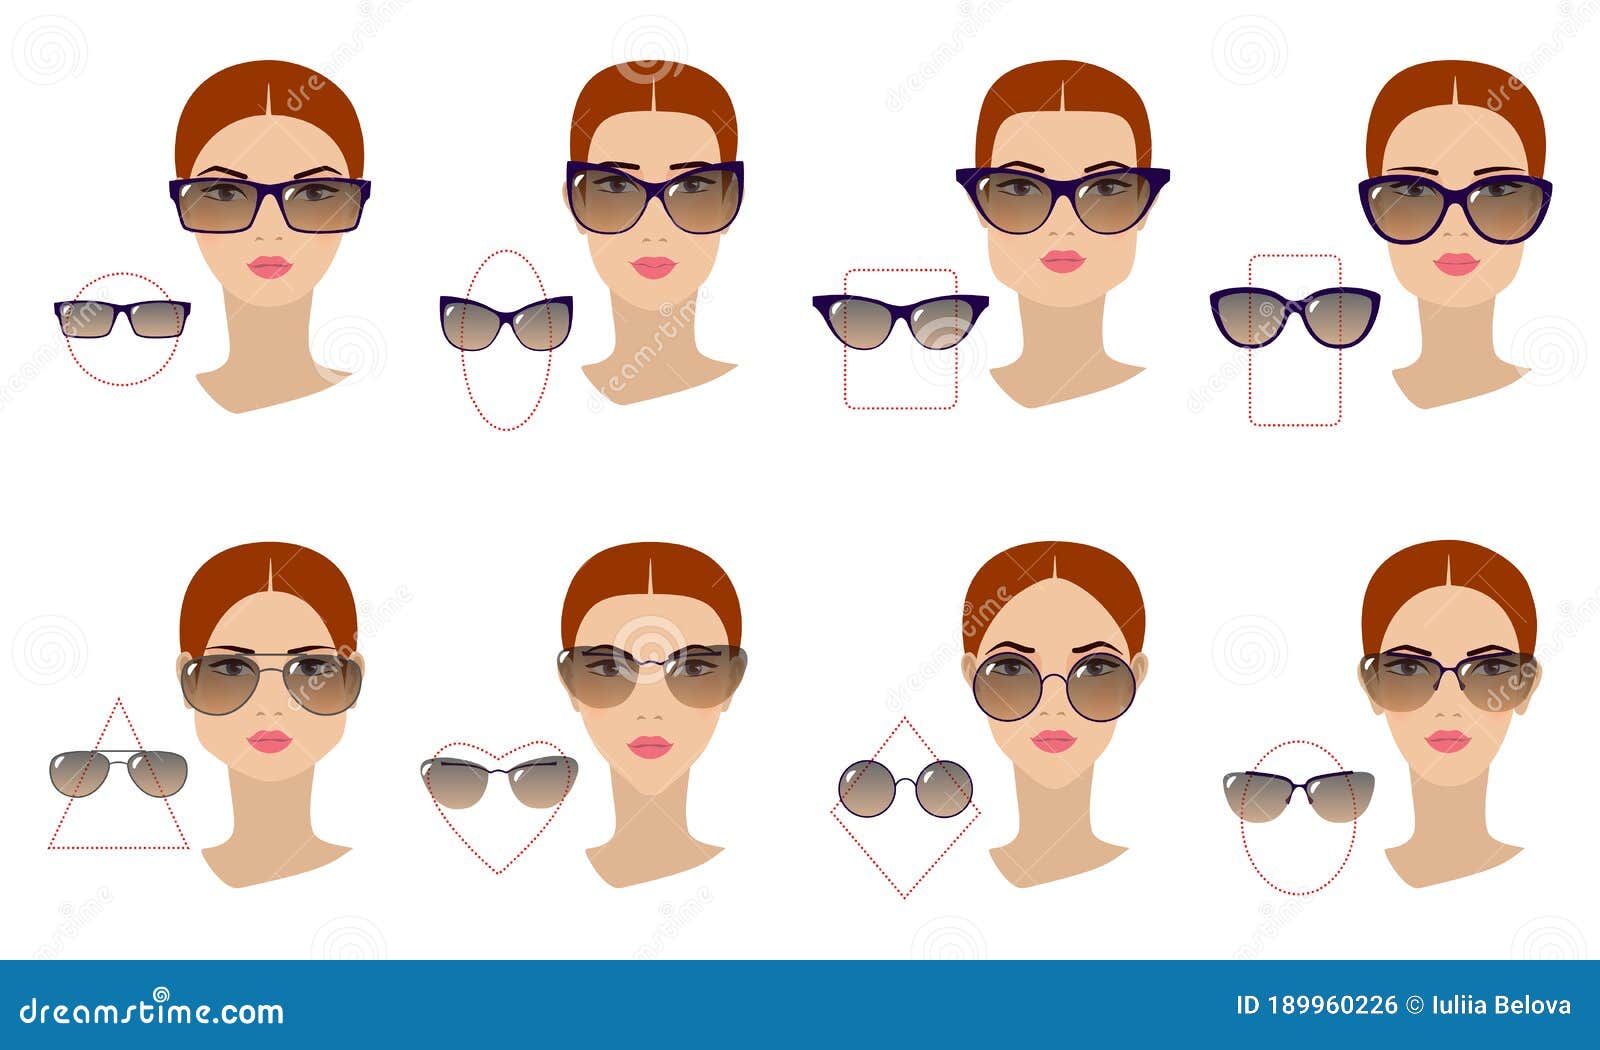 How To Choose The Best Sunglasses For Your Face Shape | ASOS